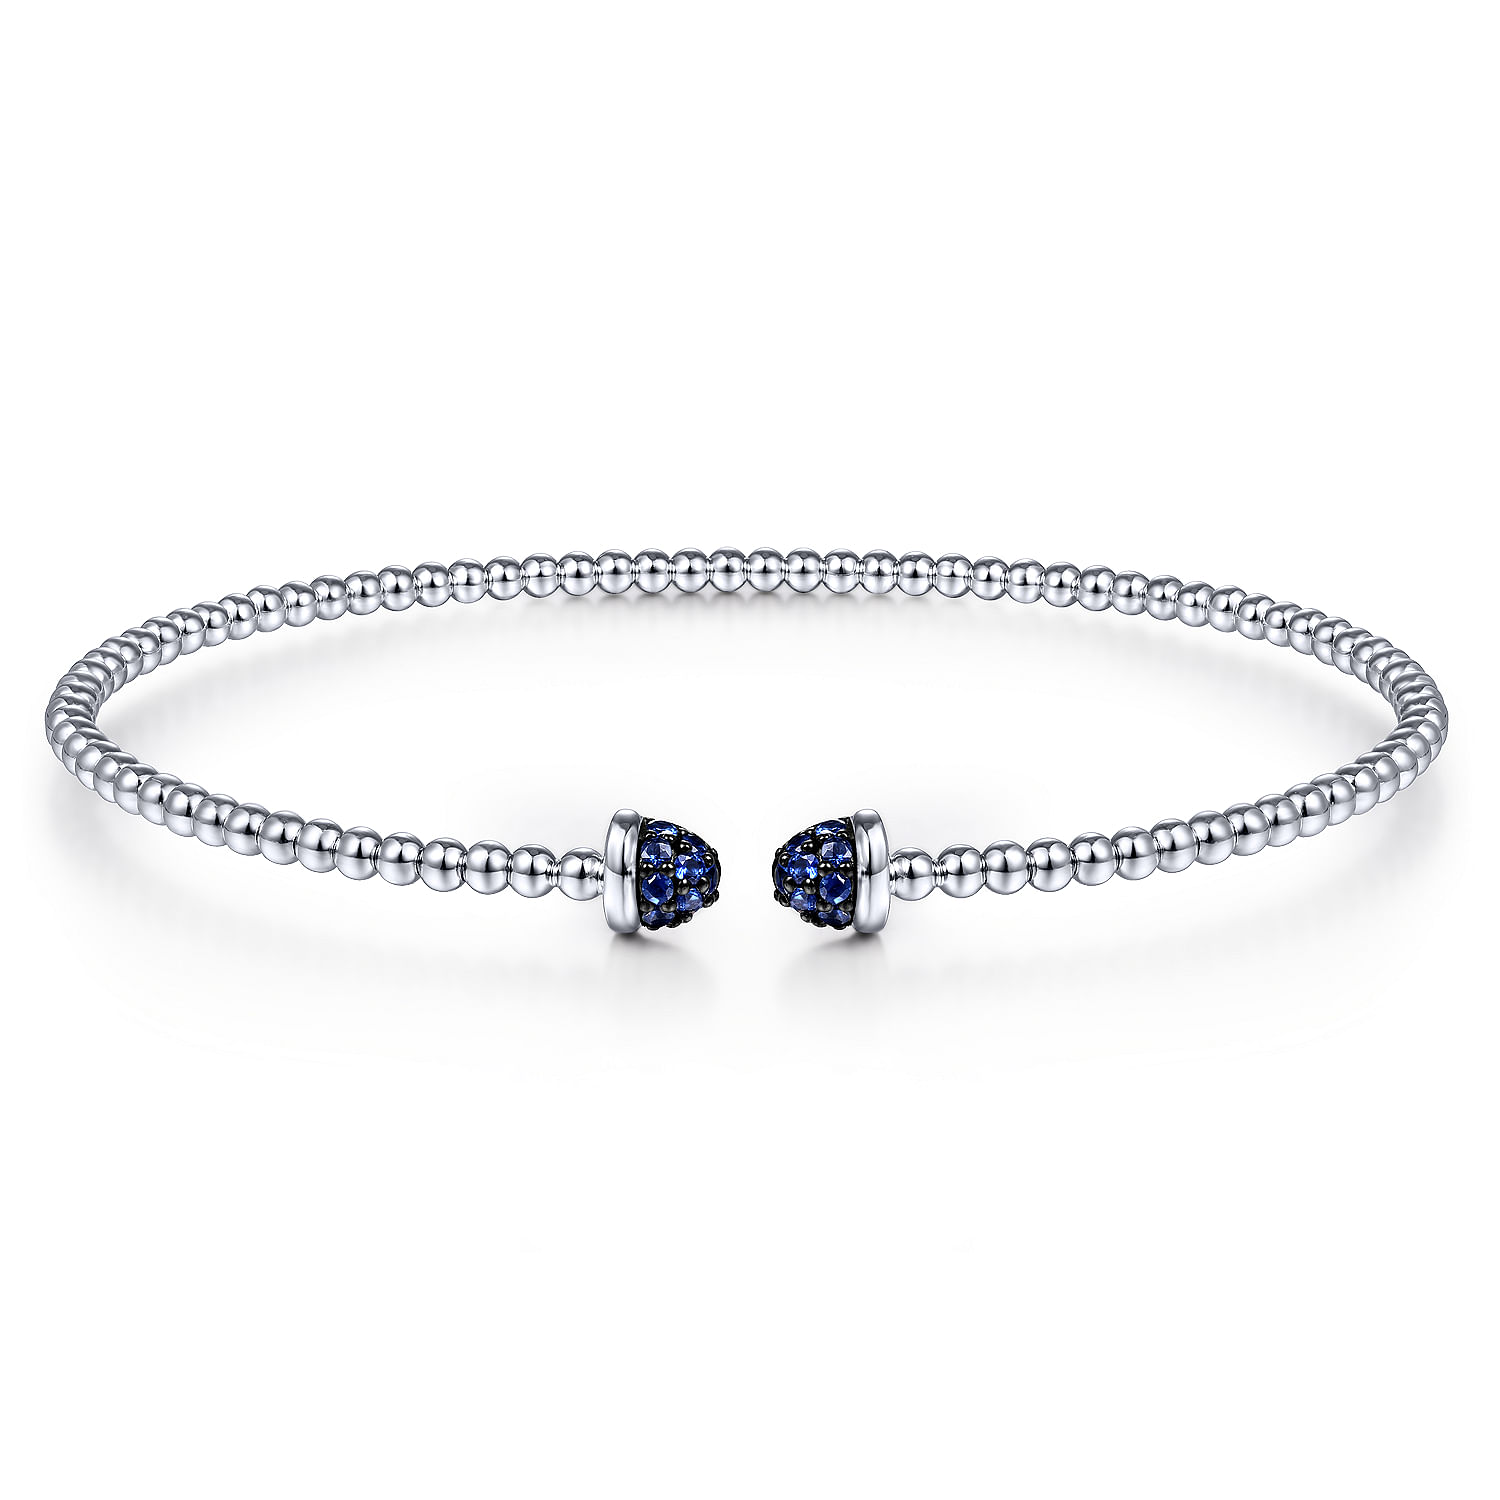 14K White Gold Bujukan Bead Cuff Bracelet with Sapphire Pave Caps